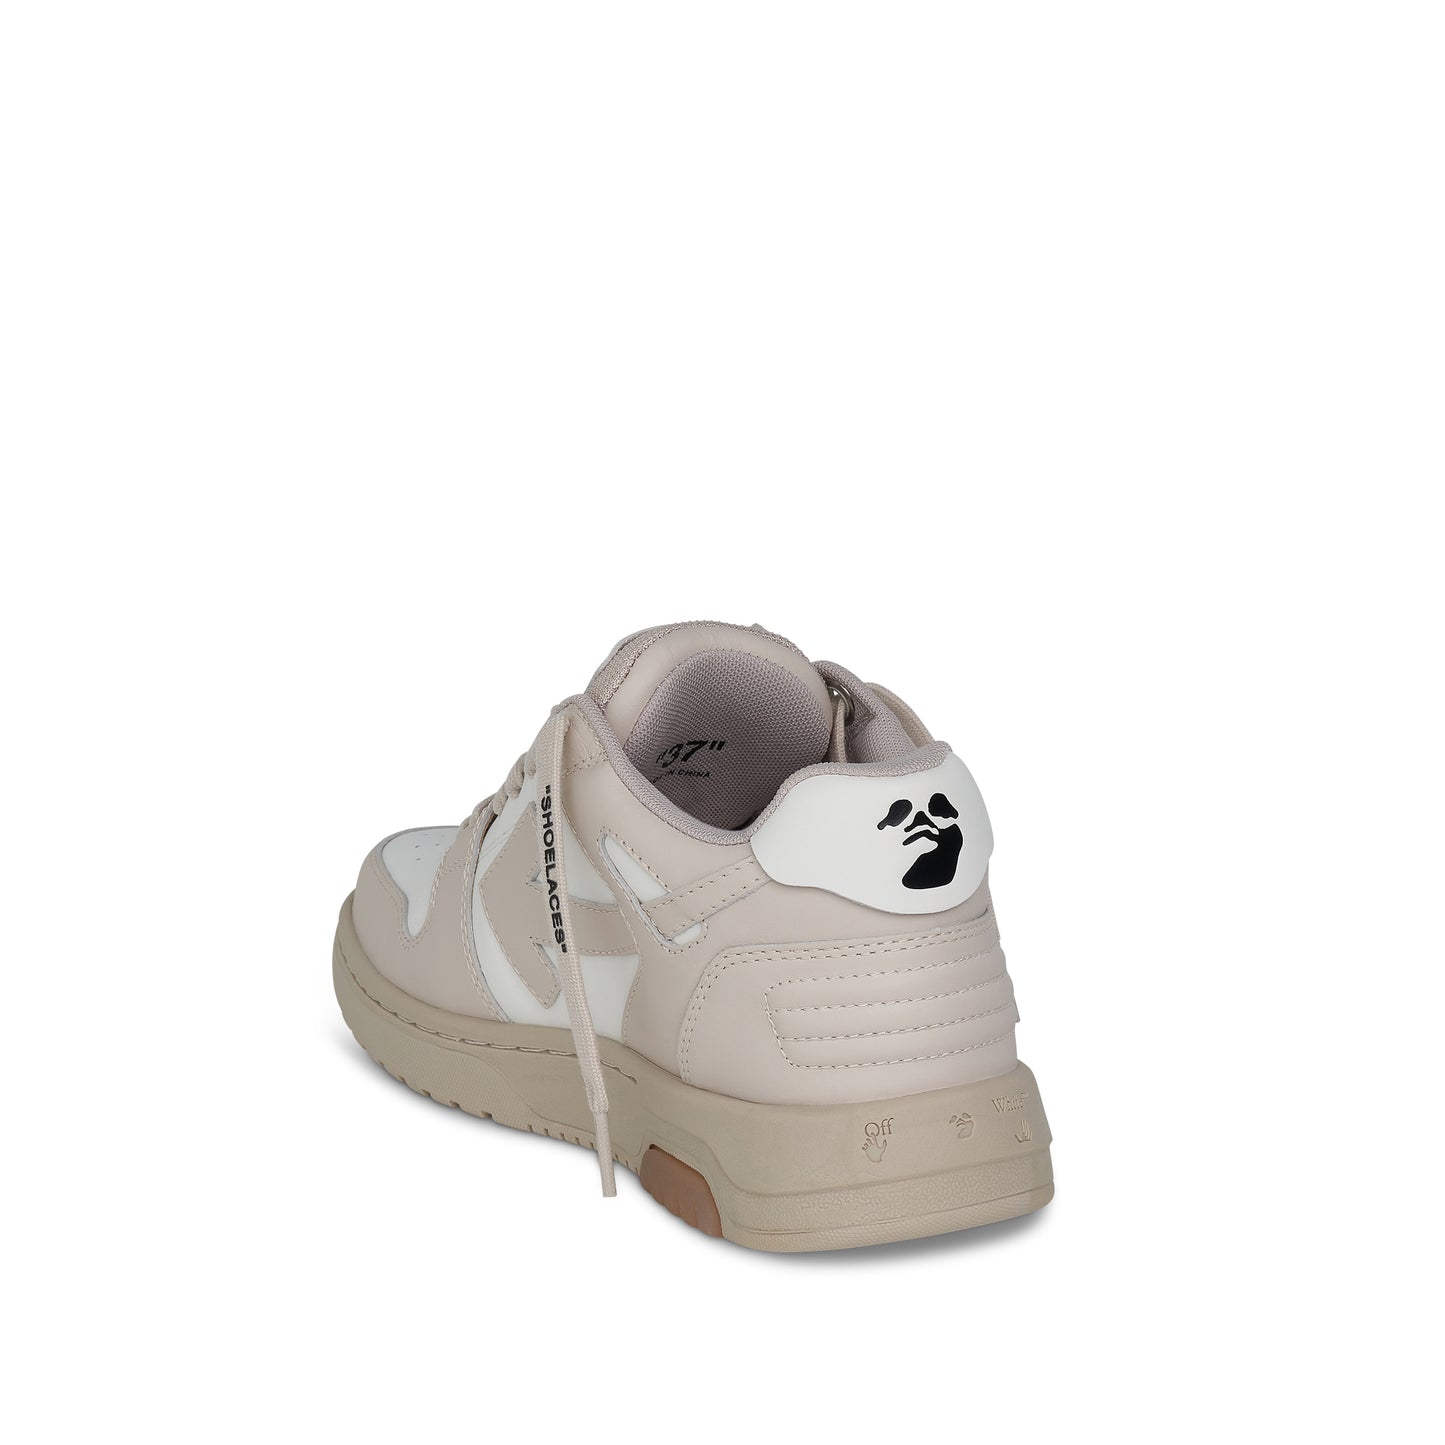 Out Of Office Calf Leather Sneaker in Off White/Beige